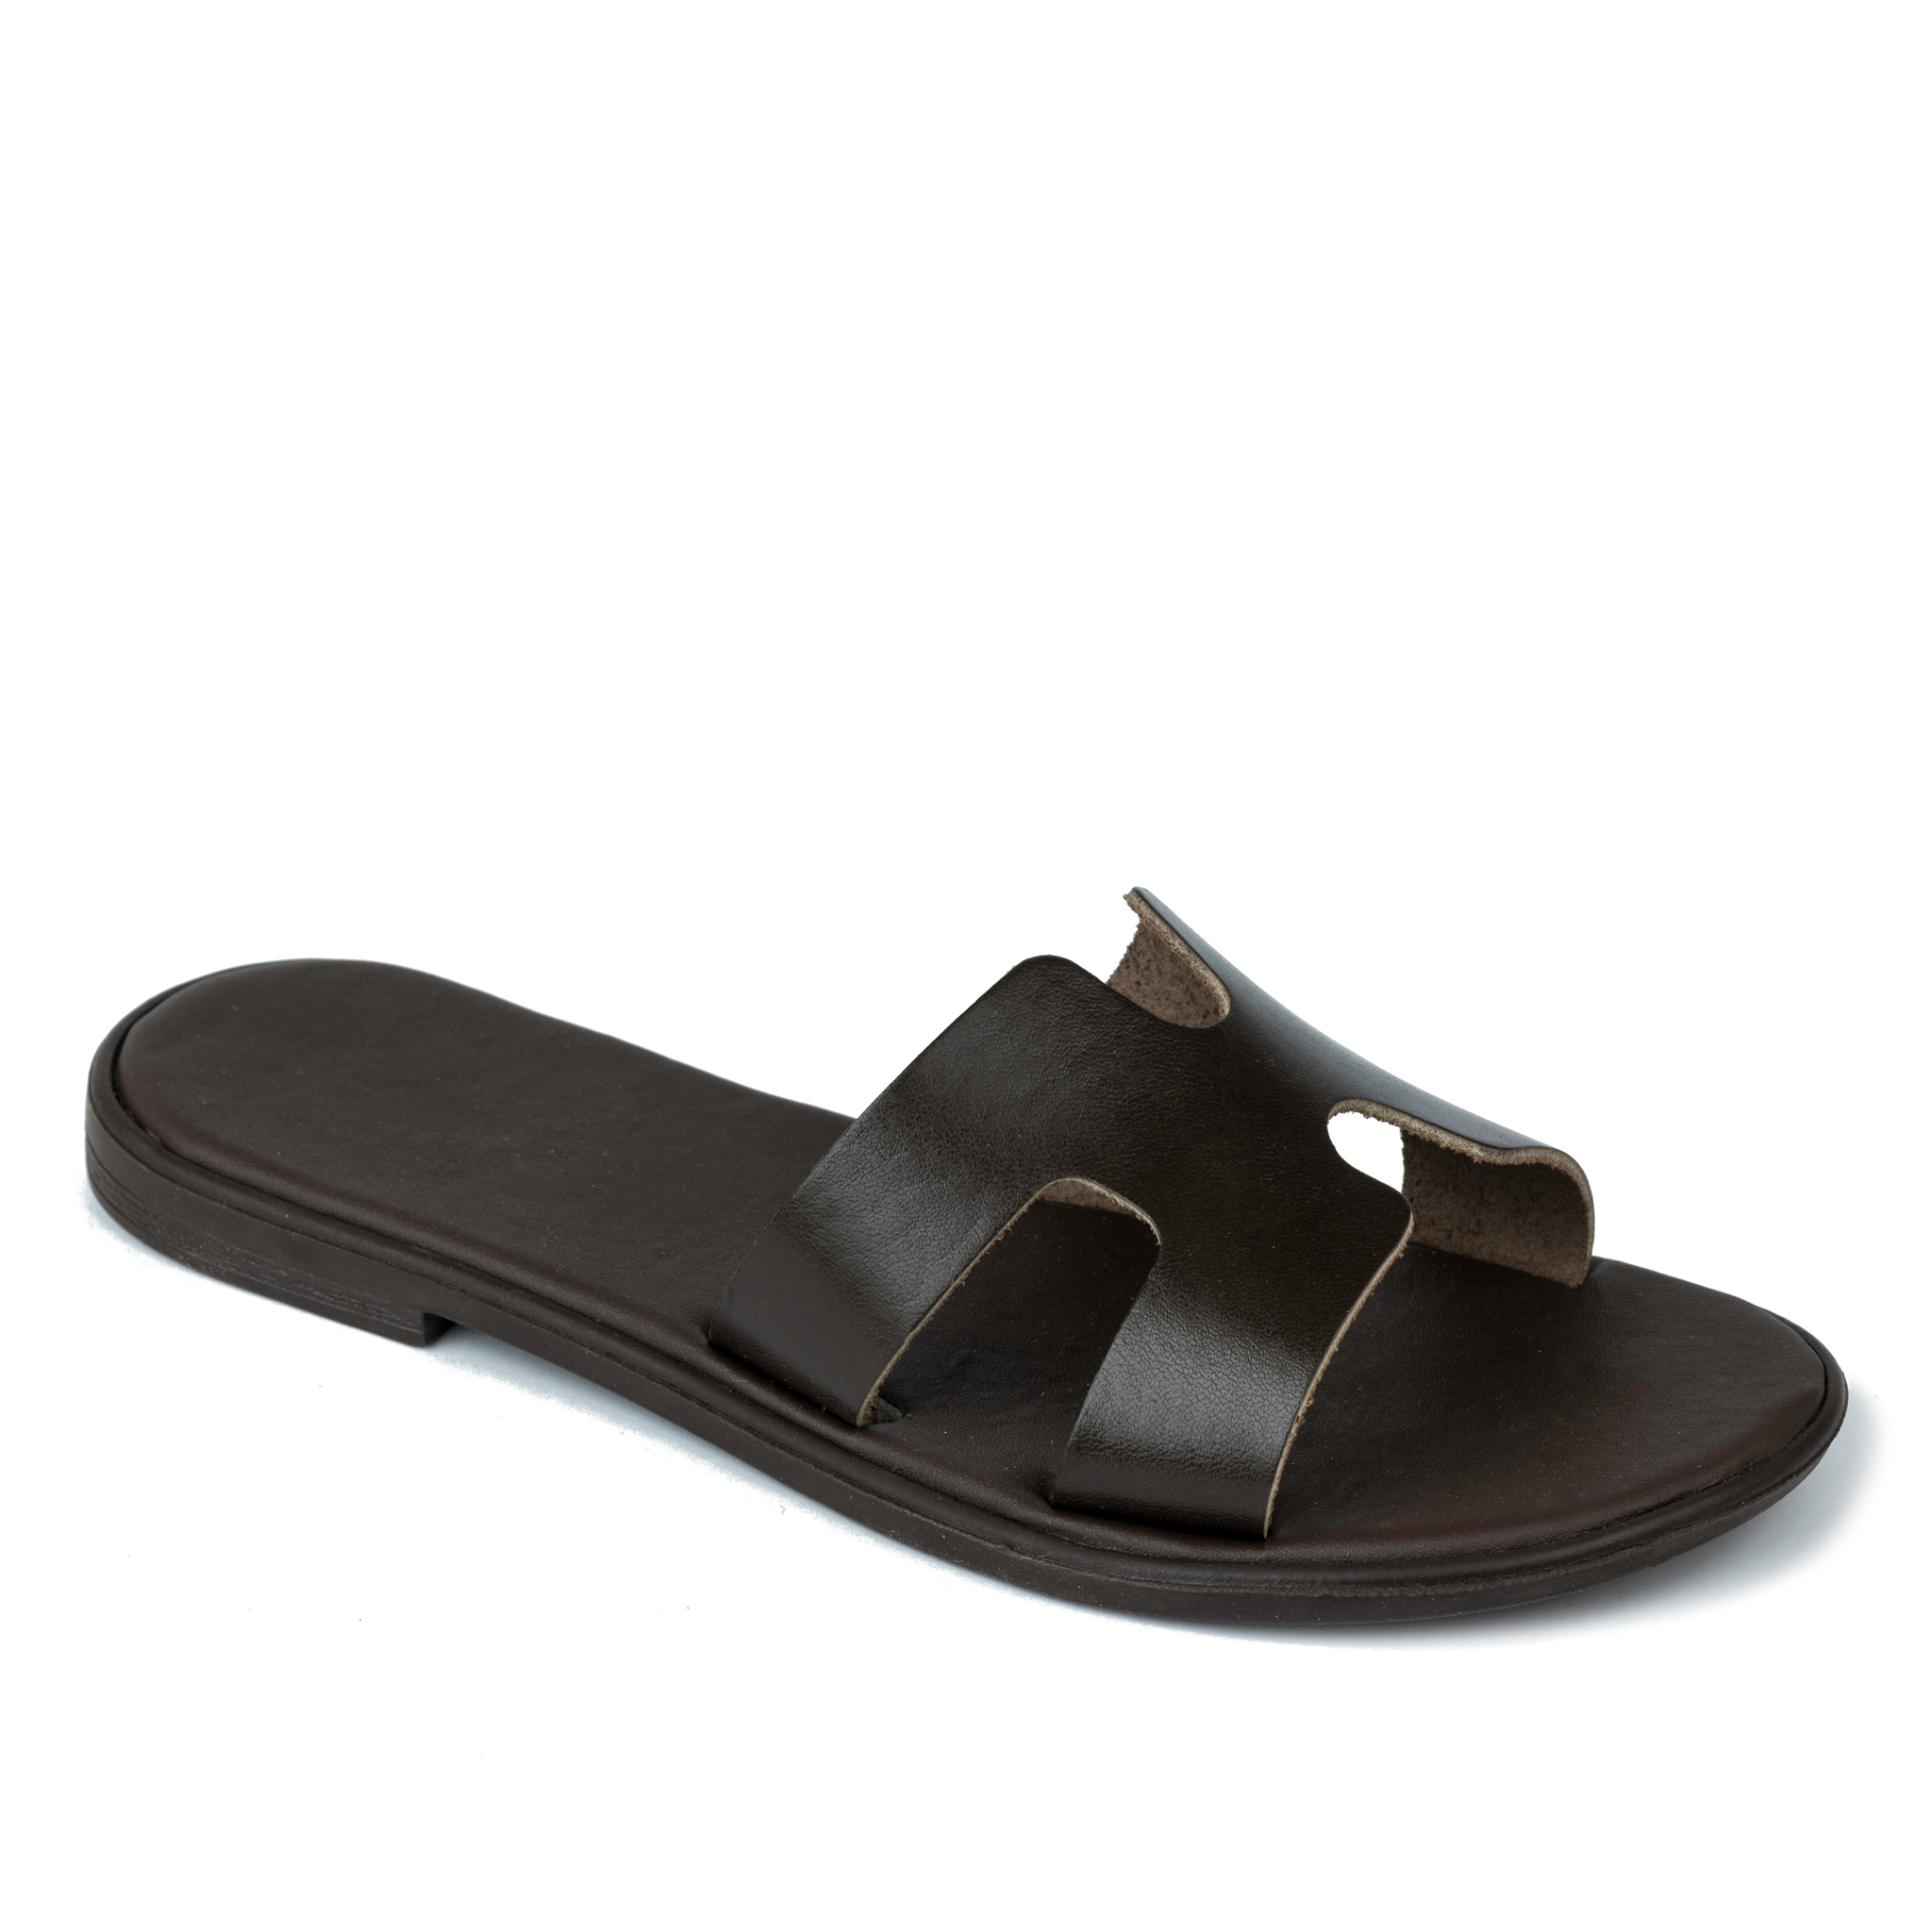 FLAT SLIPPERS - BROWN